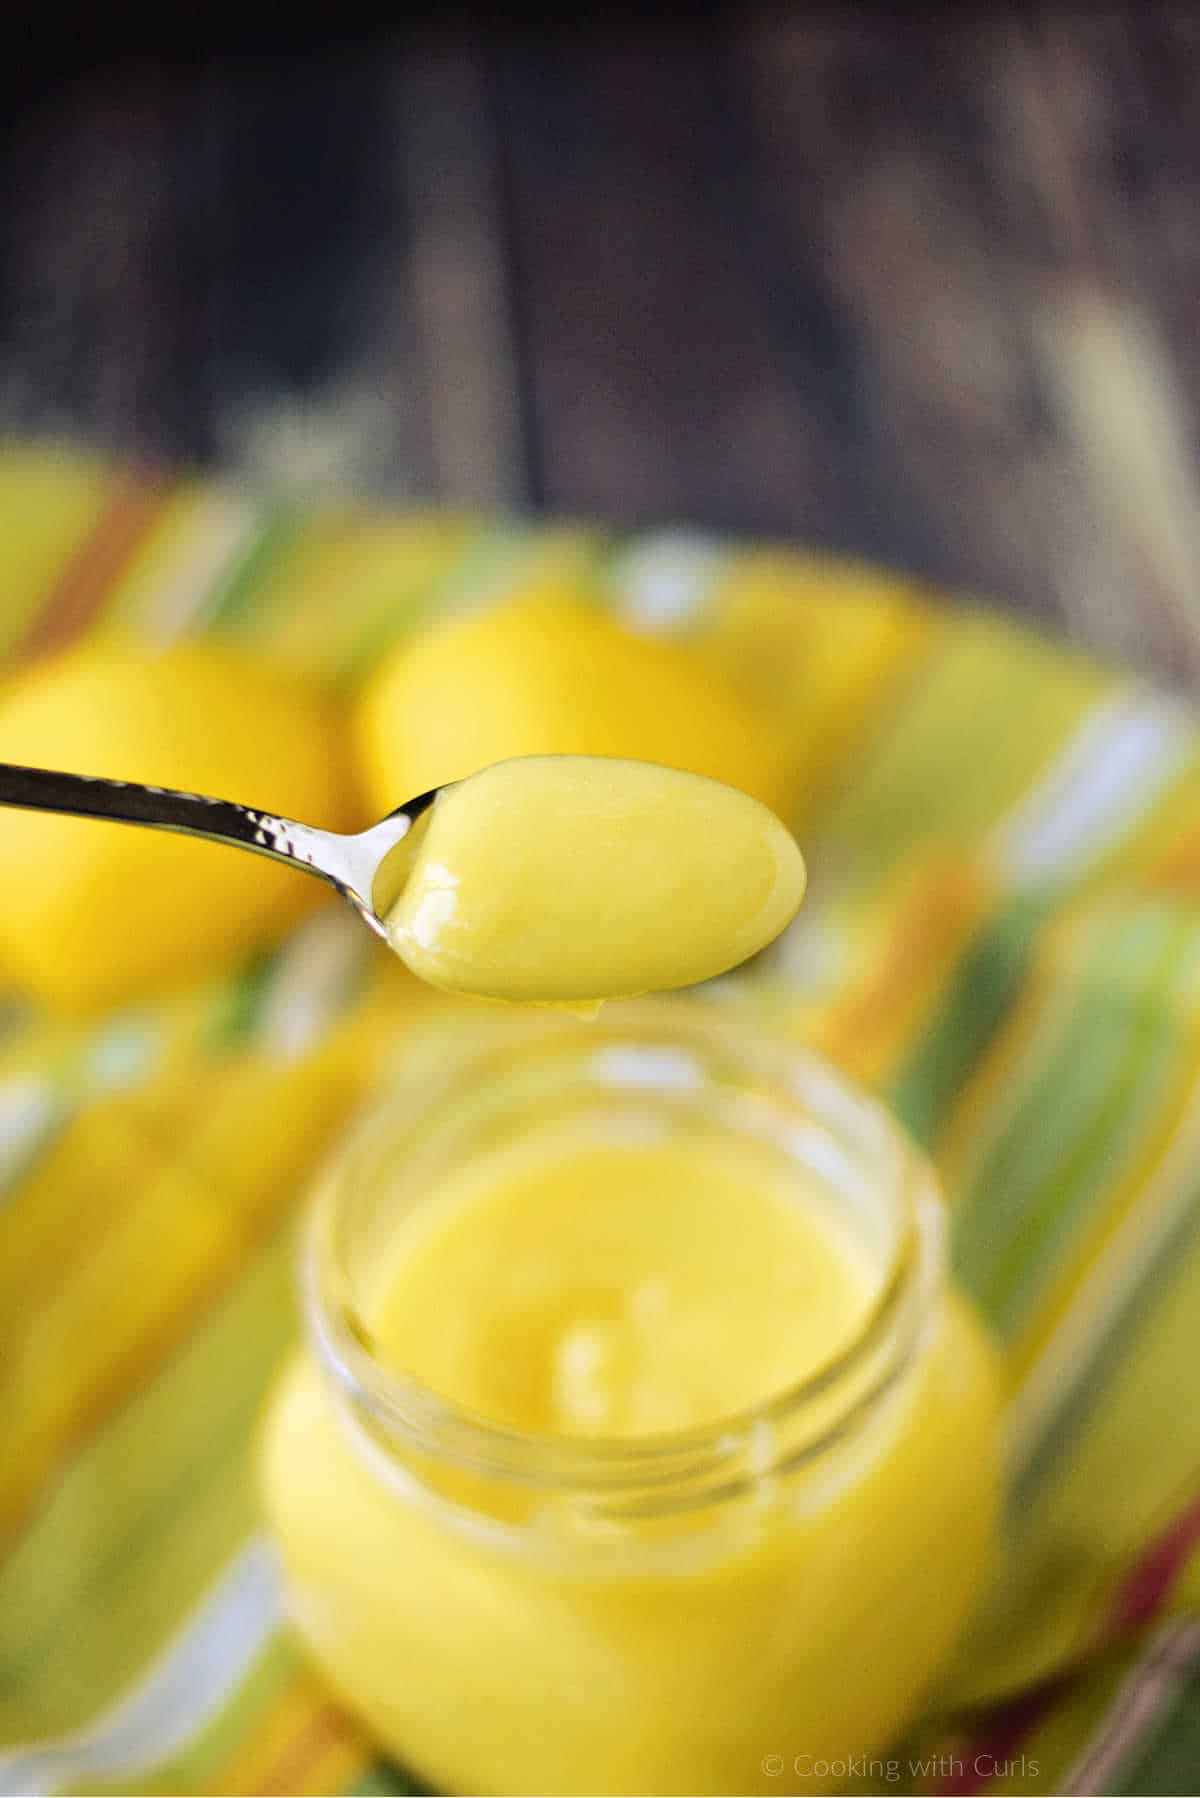 A scoop of homemade lemon curd on a spoon over the filled jar.